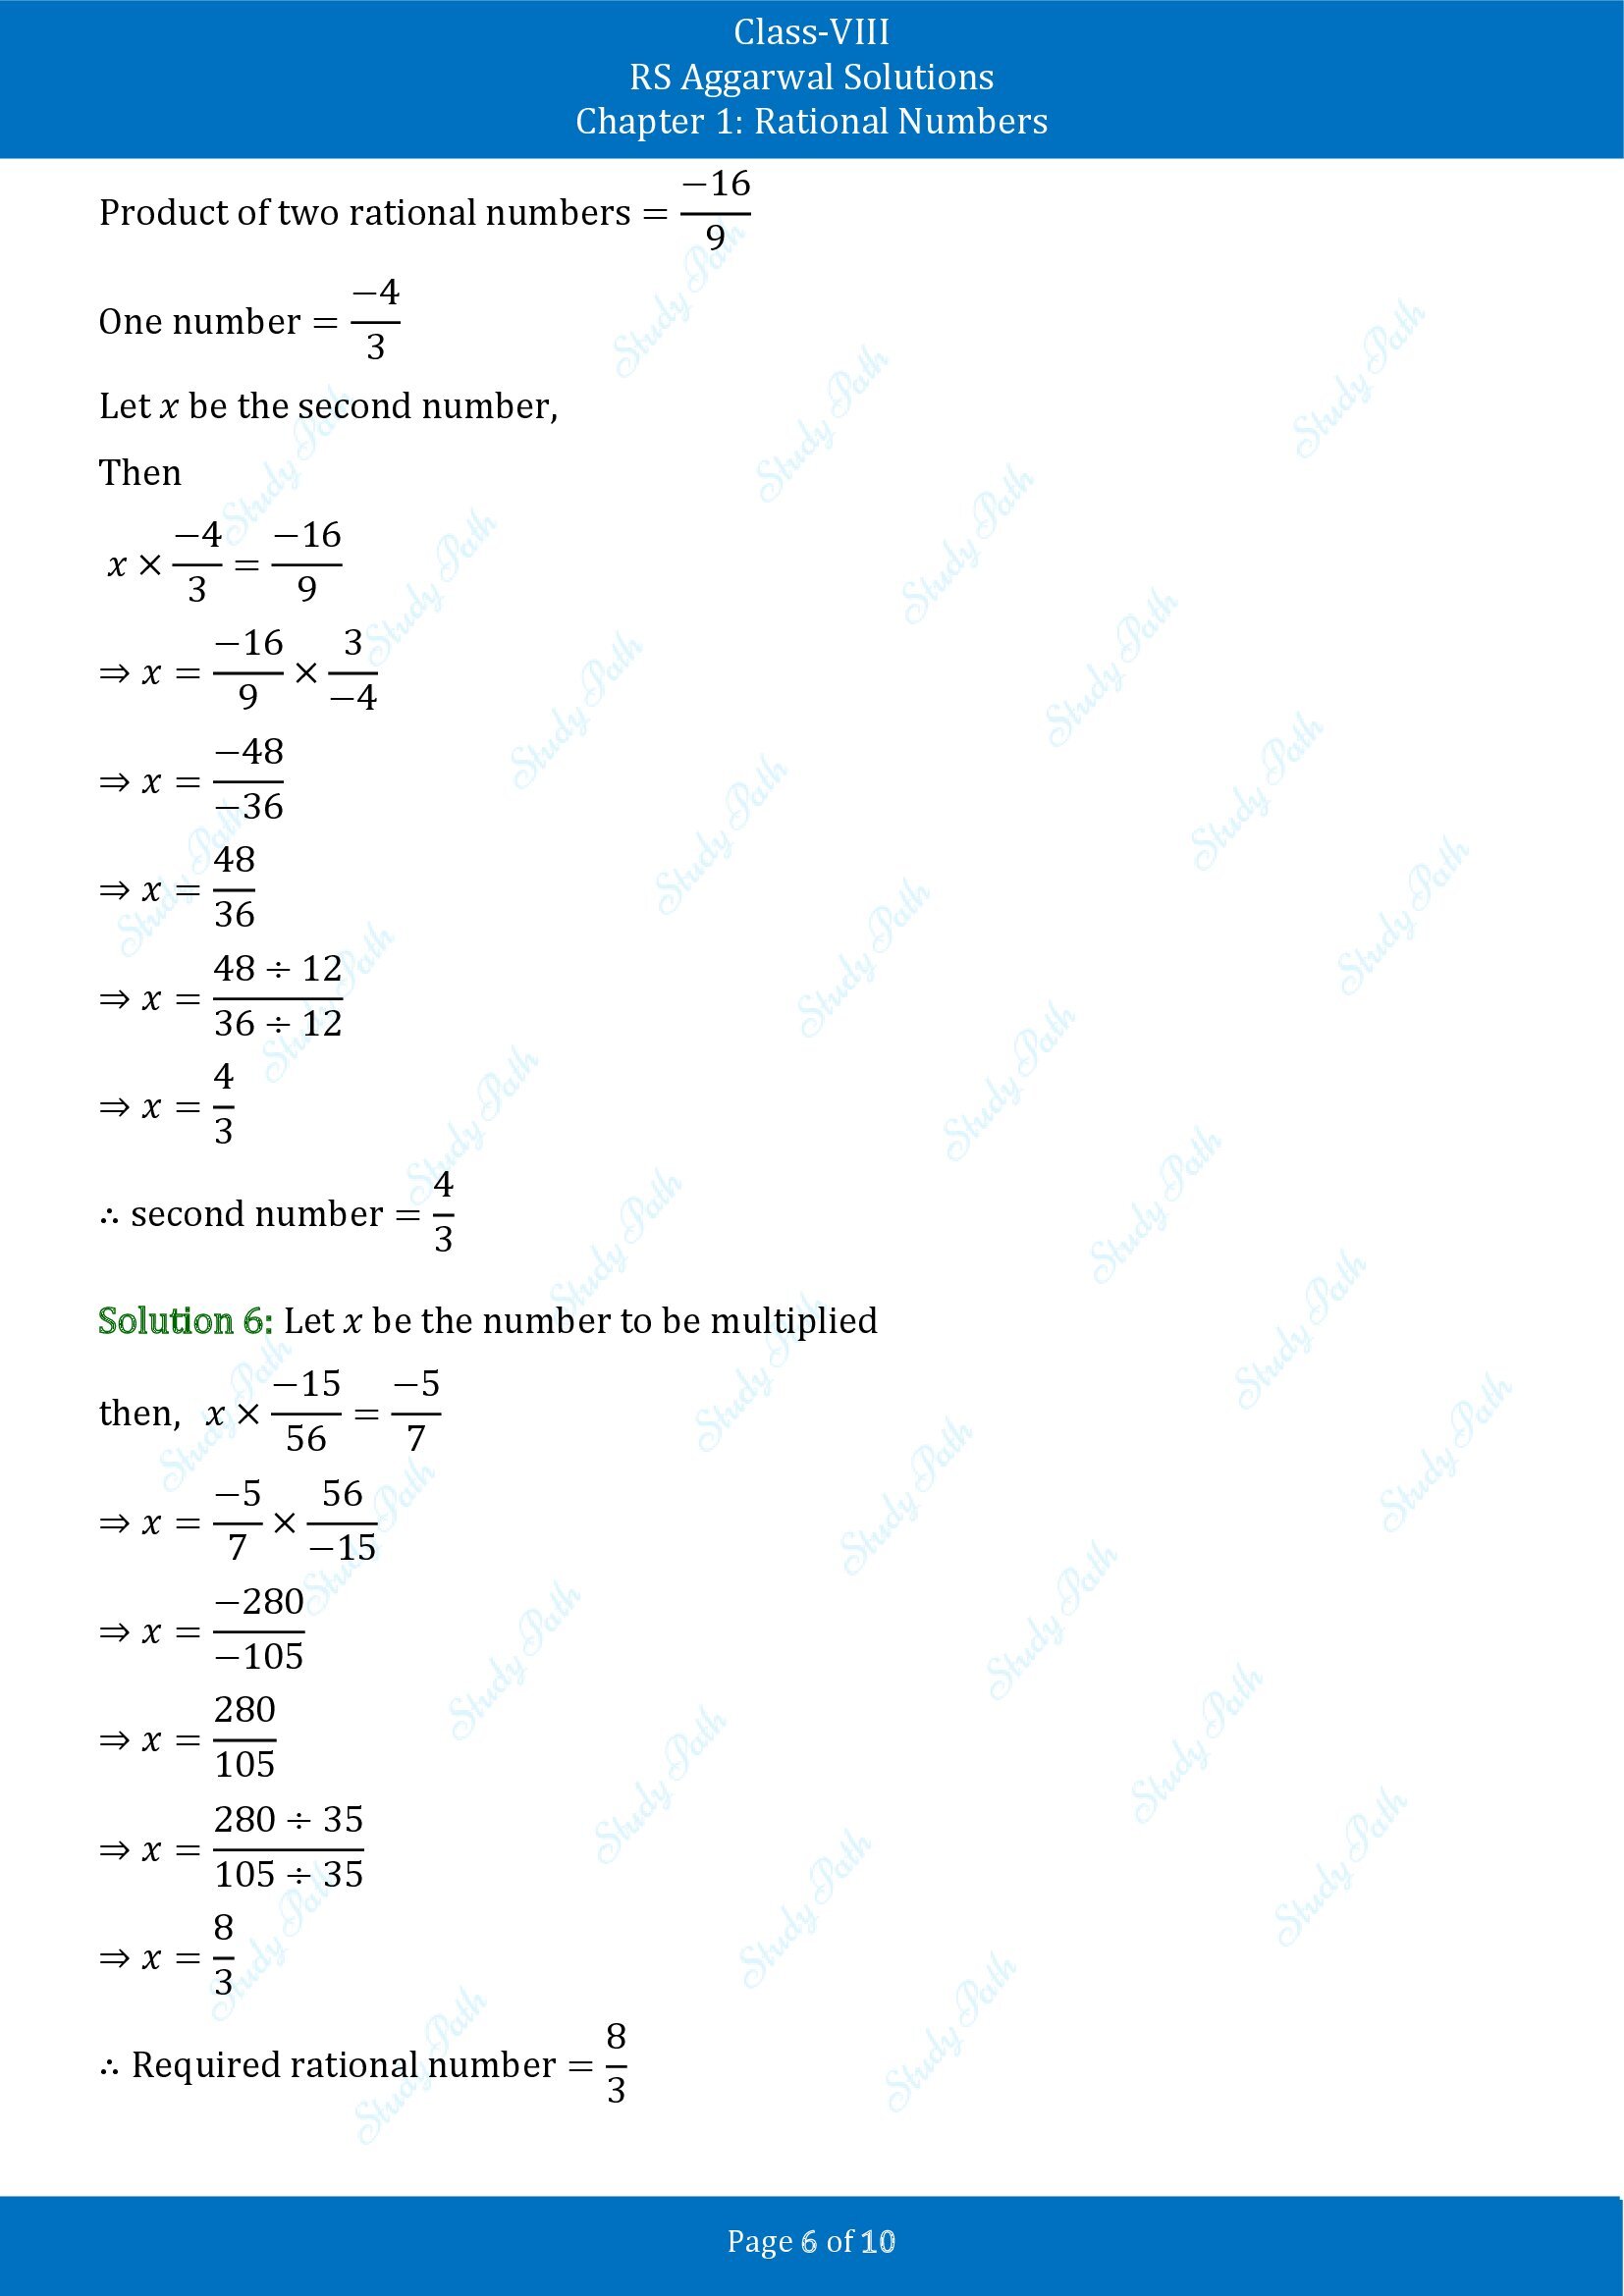 RS Aggarwal Solutions Class 8 Chapter 1 Rational Numbers Exercise 1E 00006